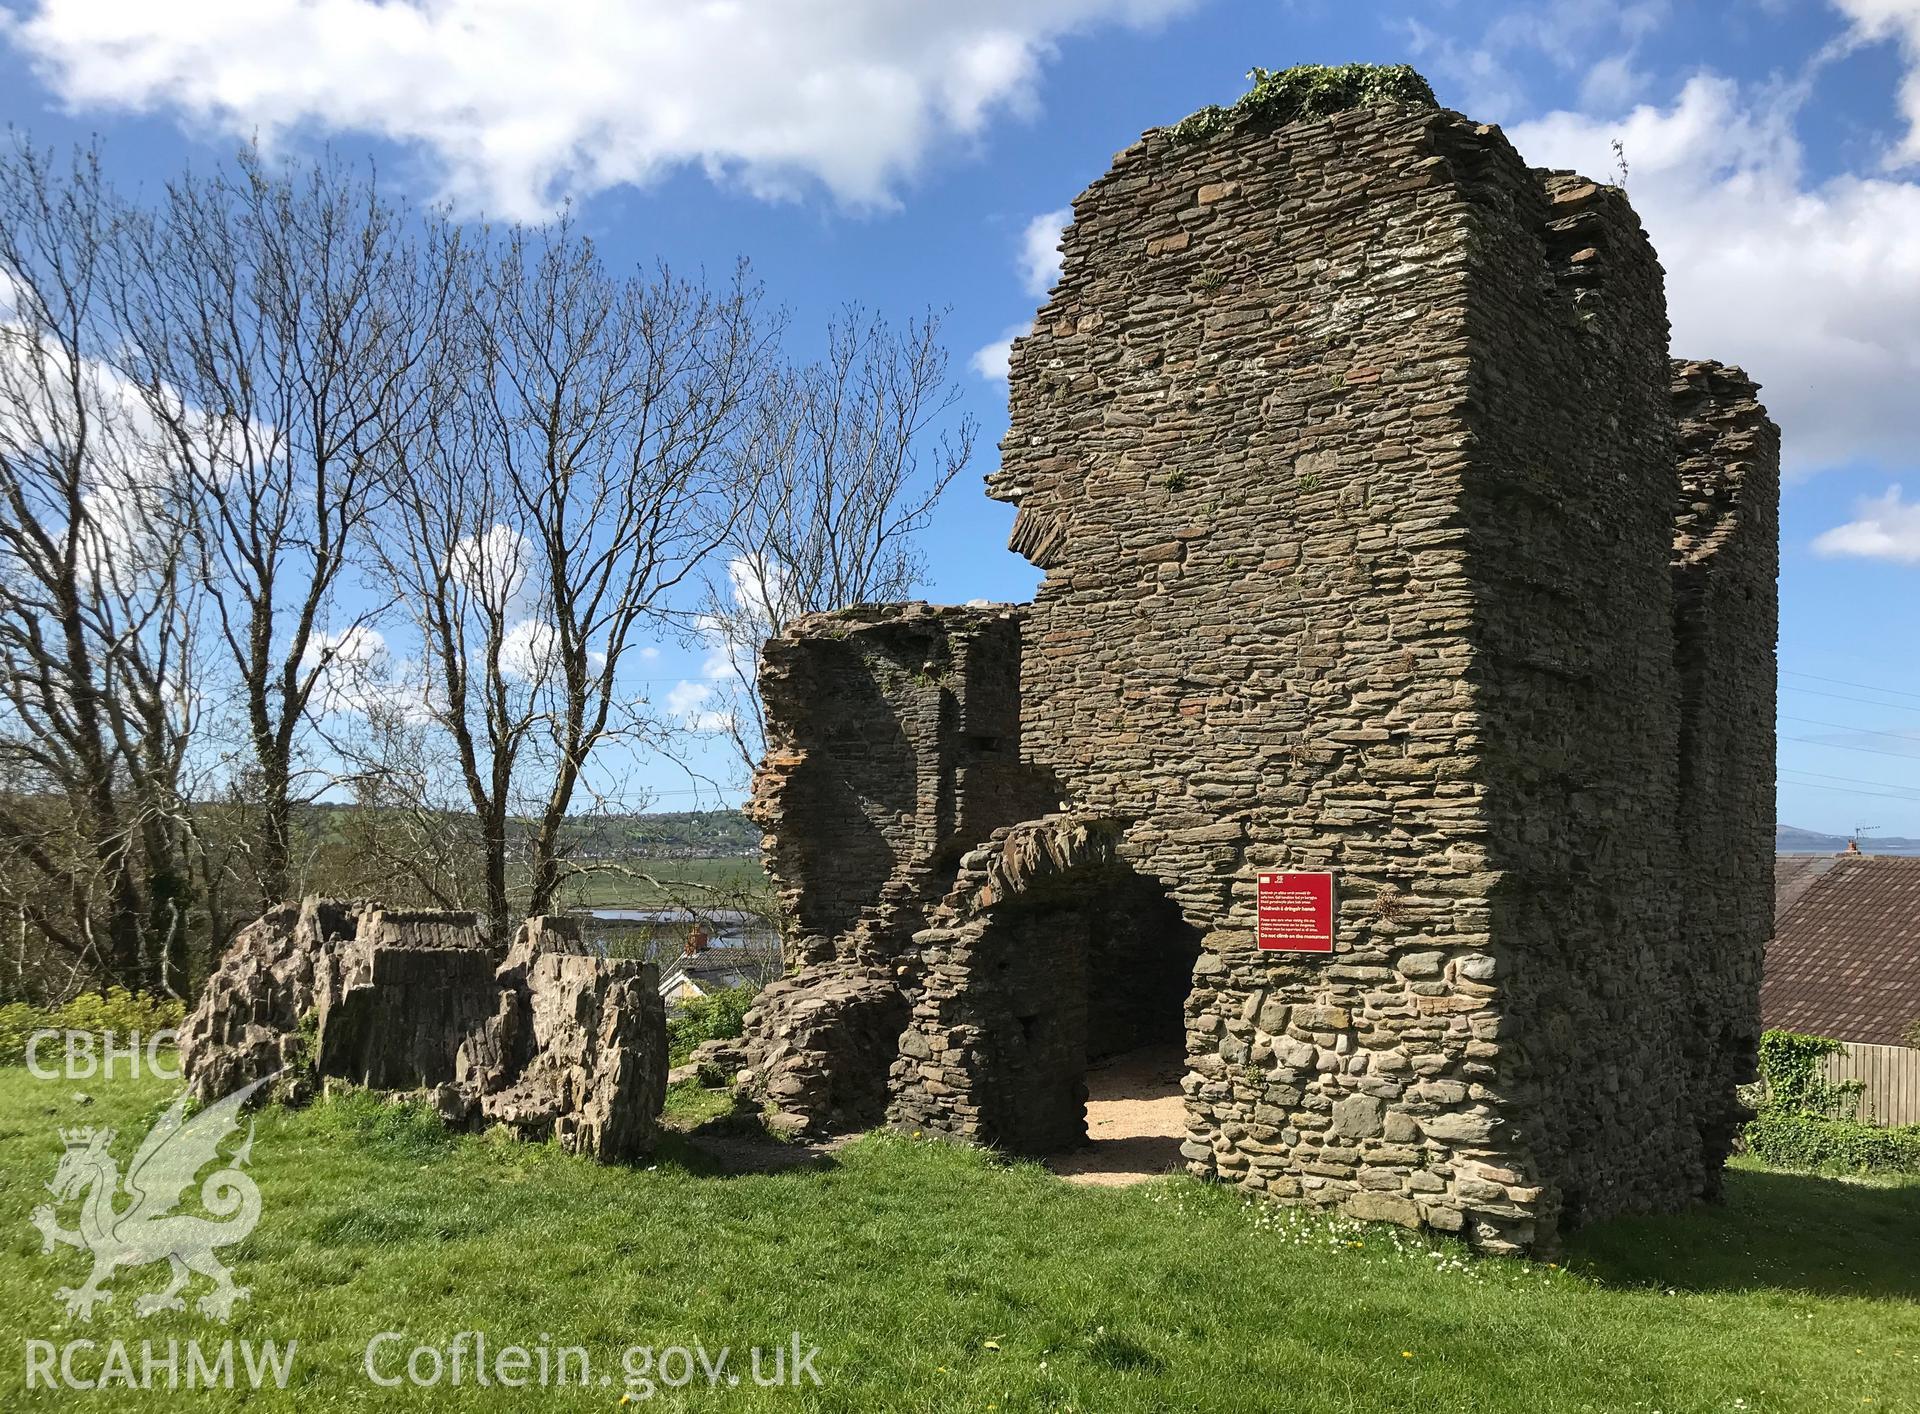 Digital colour photograph showing Loughor Castle, taken by Paul R. Davis on 5th May 2019.